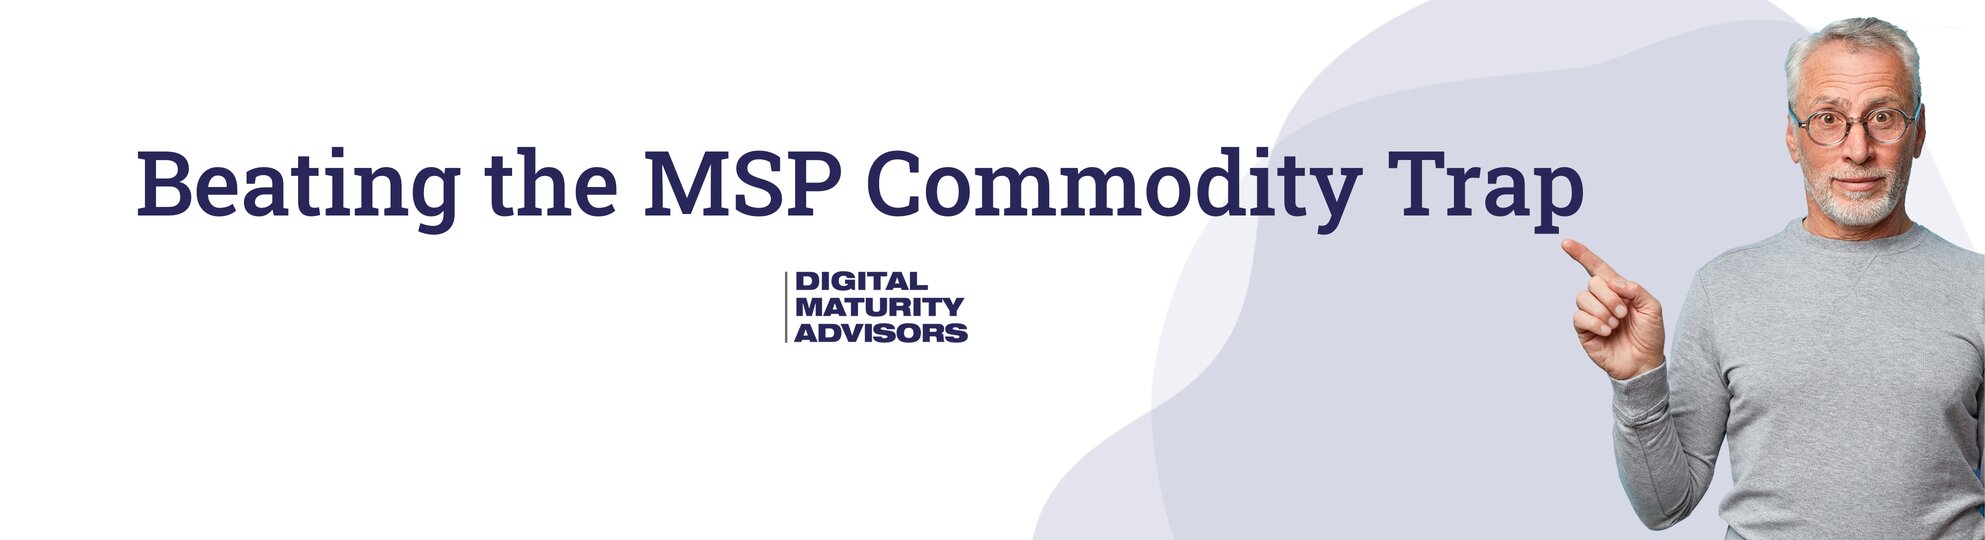 Beating the MSP Commodity Trap